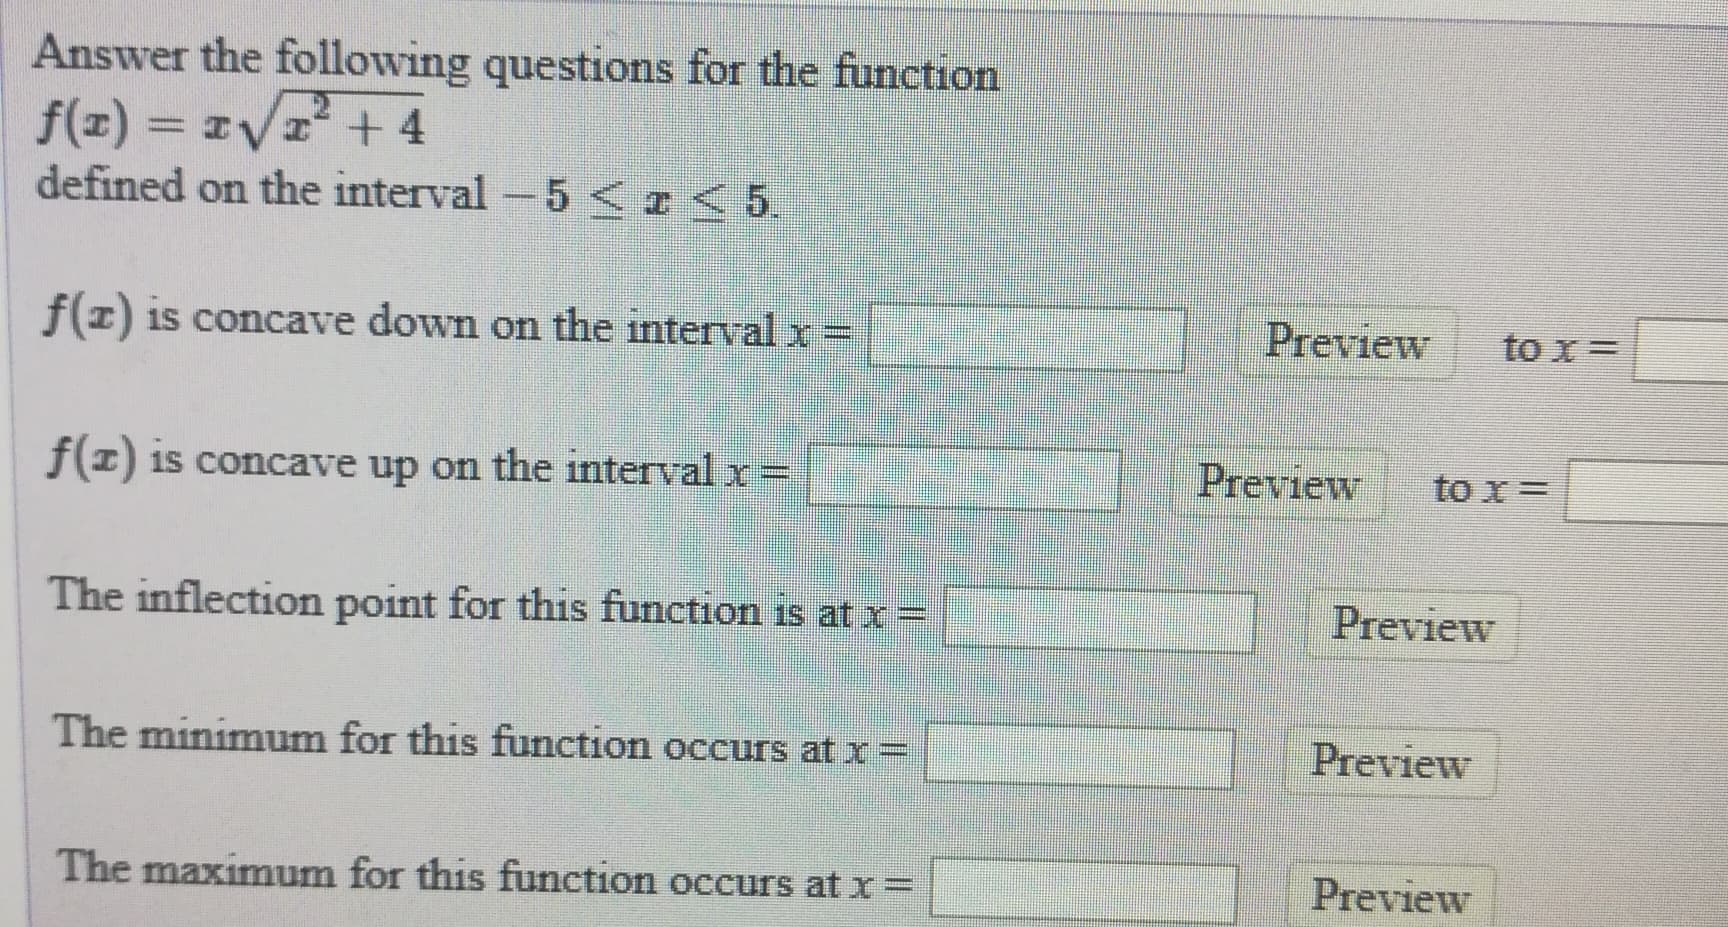 Answer the following questions for the function
f(z) = IVr+4
defined on the interval -5 <I< 5
f(1) is concave down on the interval x =
Preview
to x=
f(1) 1s concave up on the interval x=
Preview
to x=
The inflection point for this function is at x=
Preview
The minimum for this function occurs at x =
Preview
The maximum for this function occurs at x=
Preview
